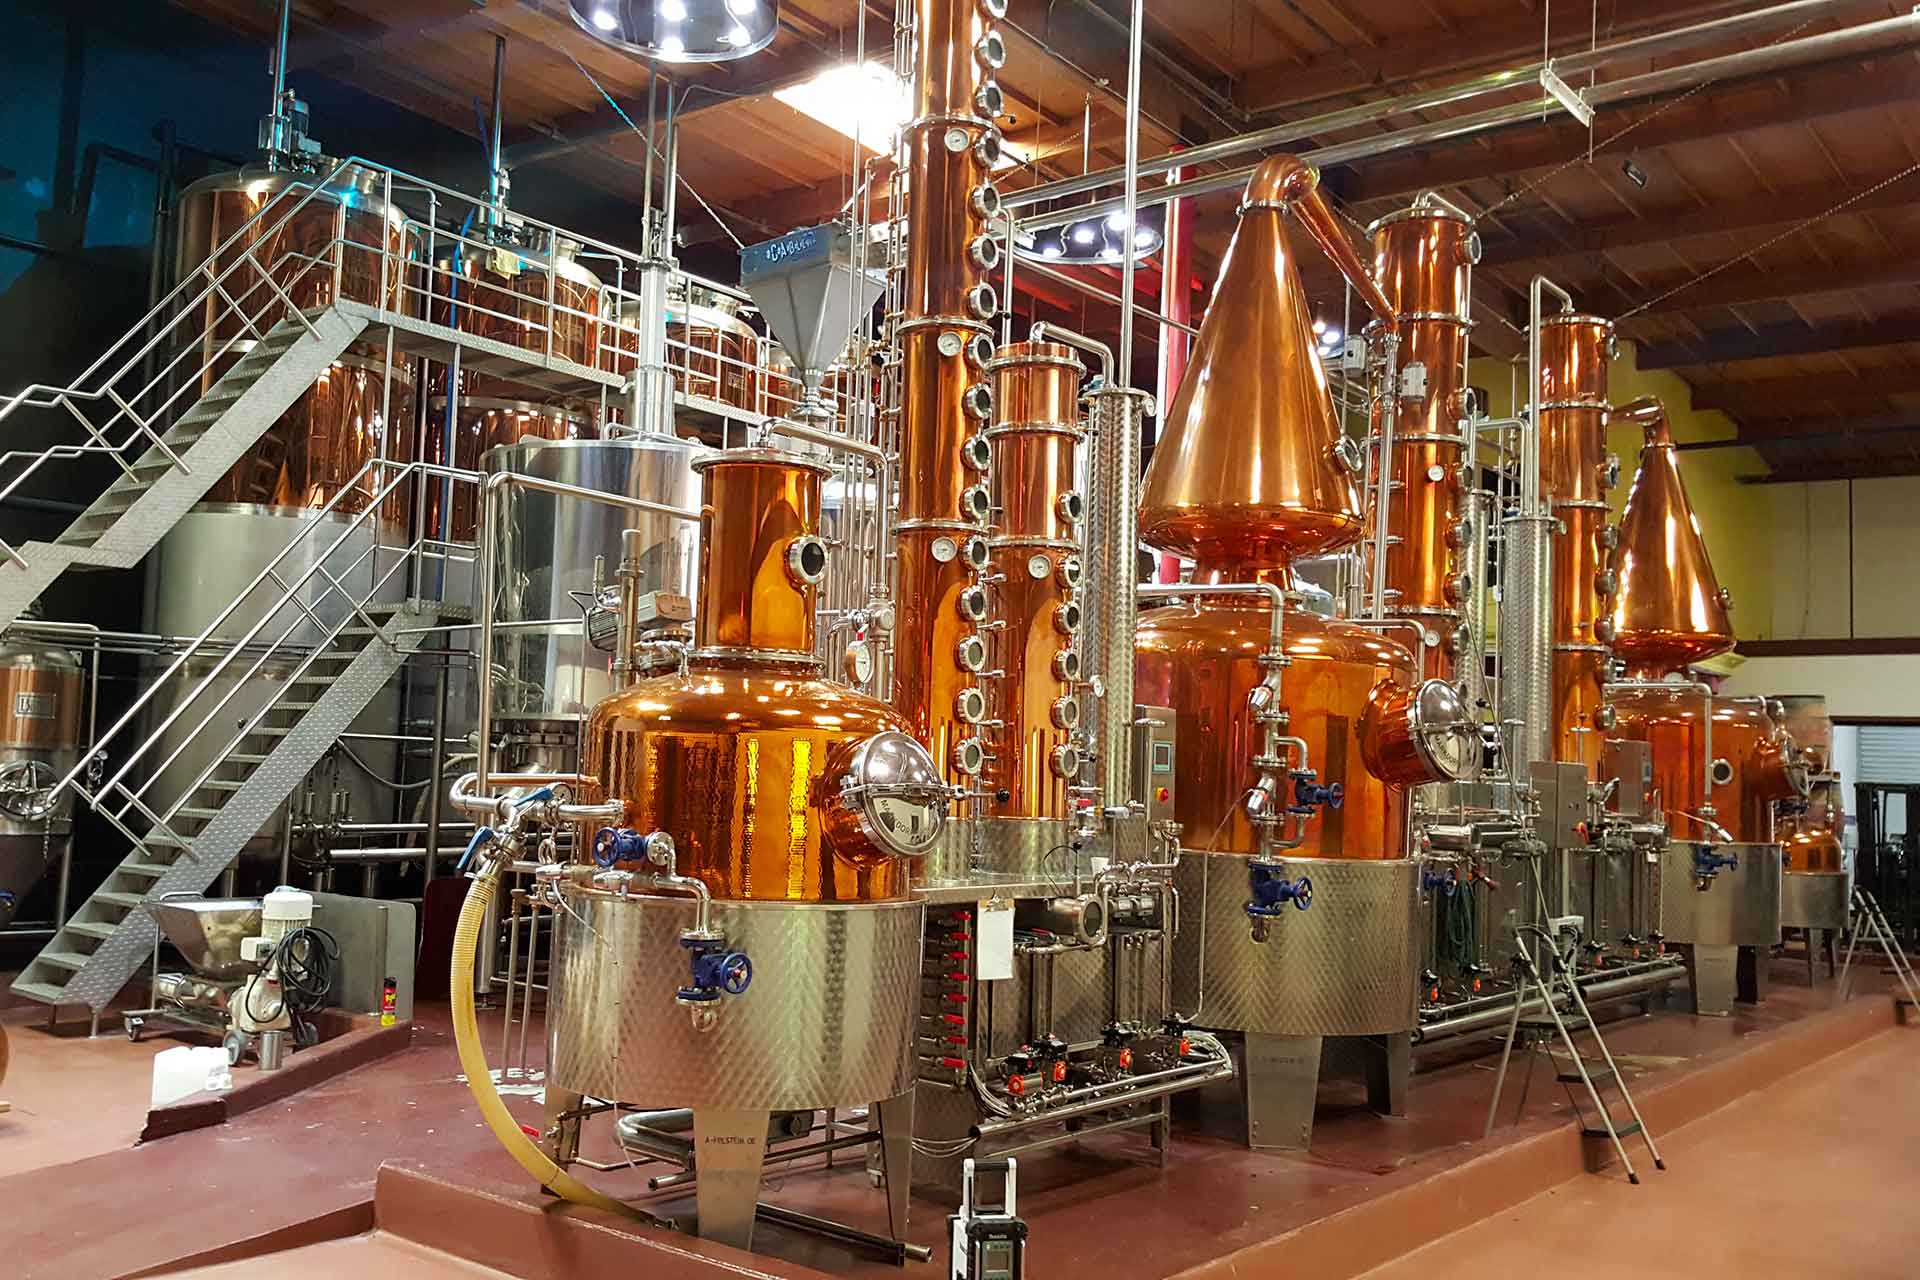 Los Angeles Distillery's brewing and distilling equipment inside the production warehouse